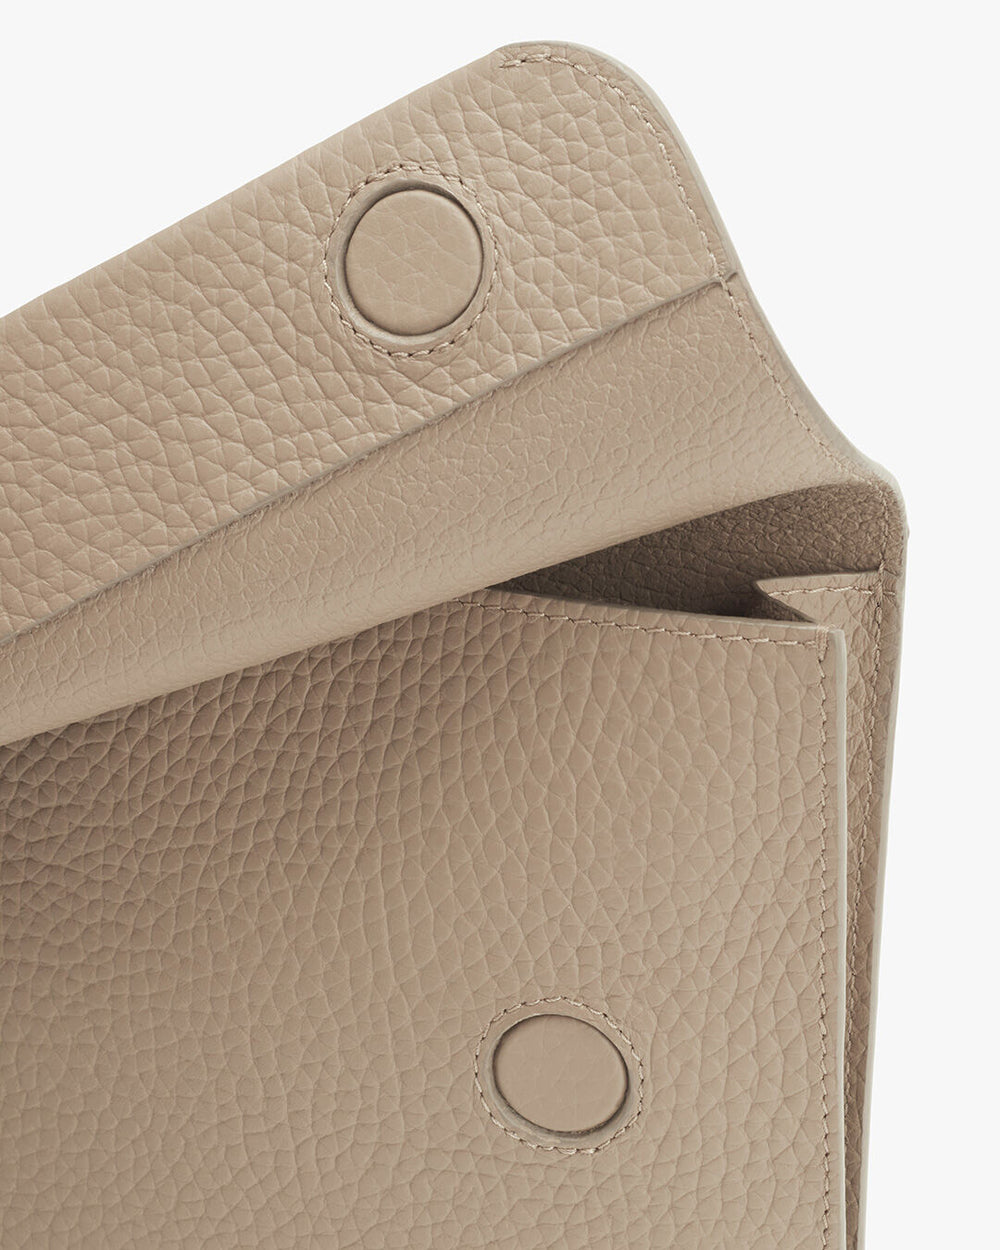 Close-up view of a textured purse with flap open.